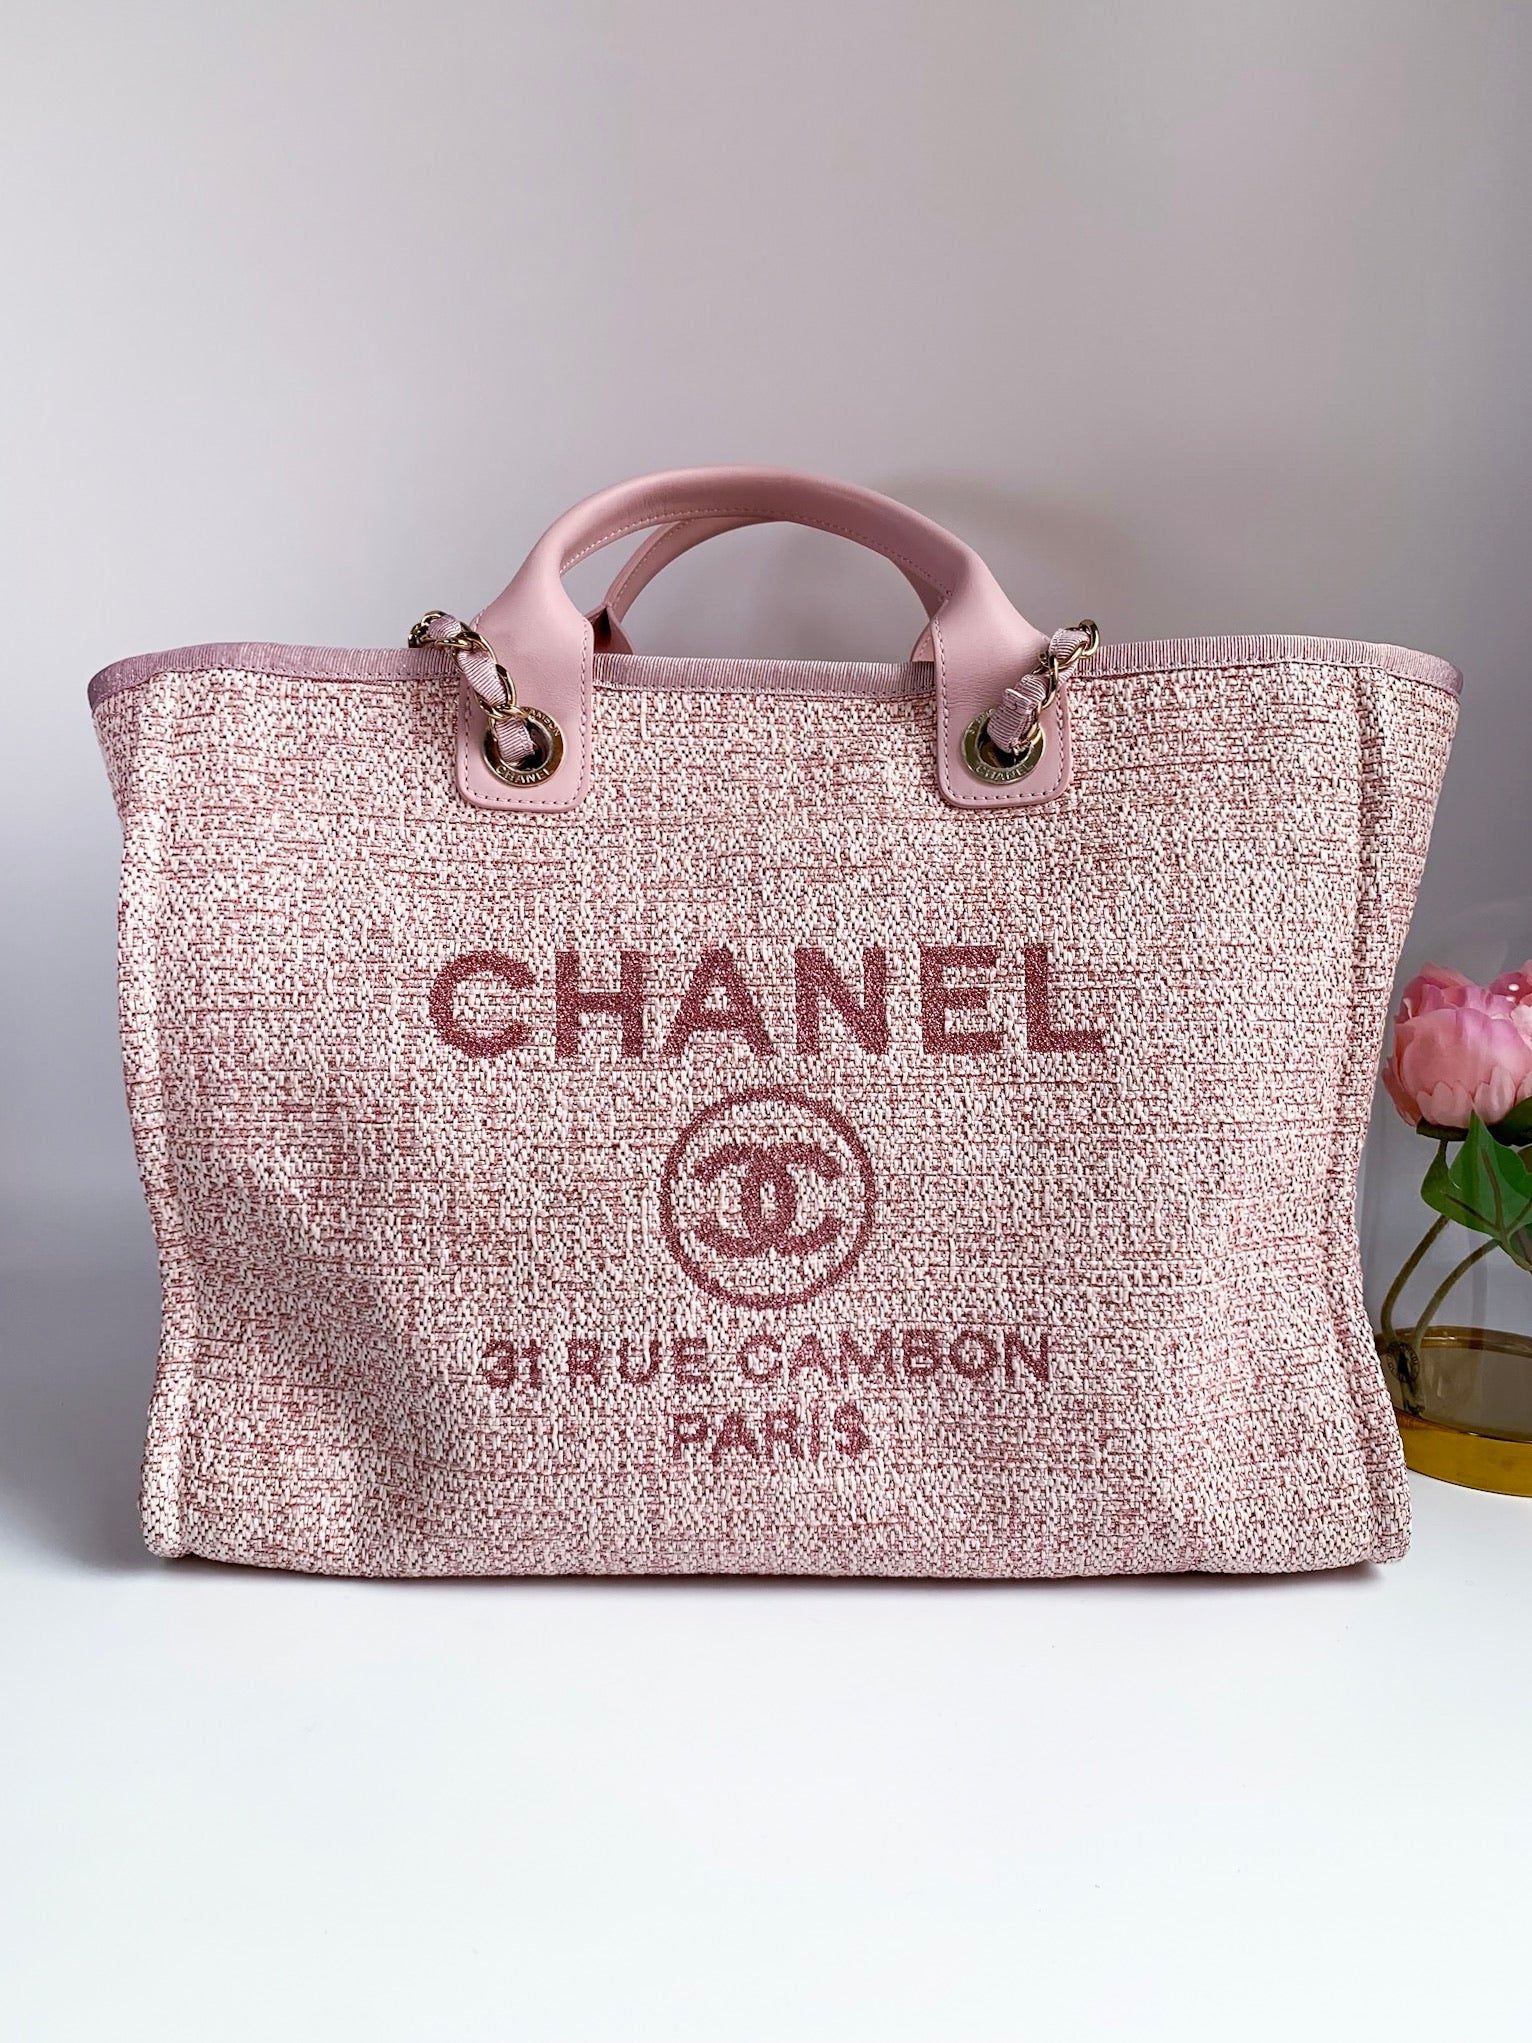 straw chanel deauville tote large